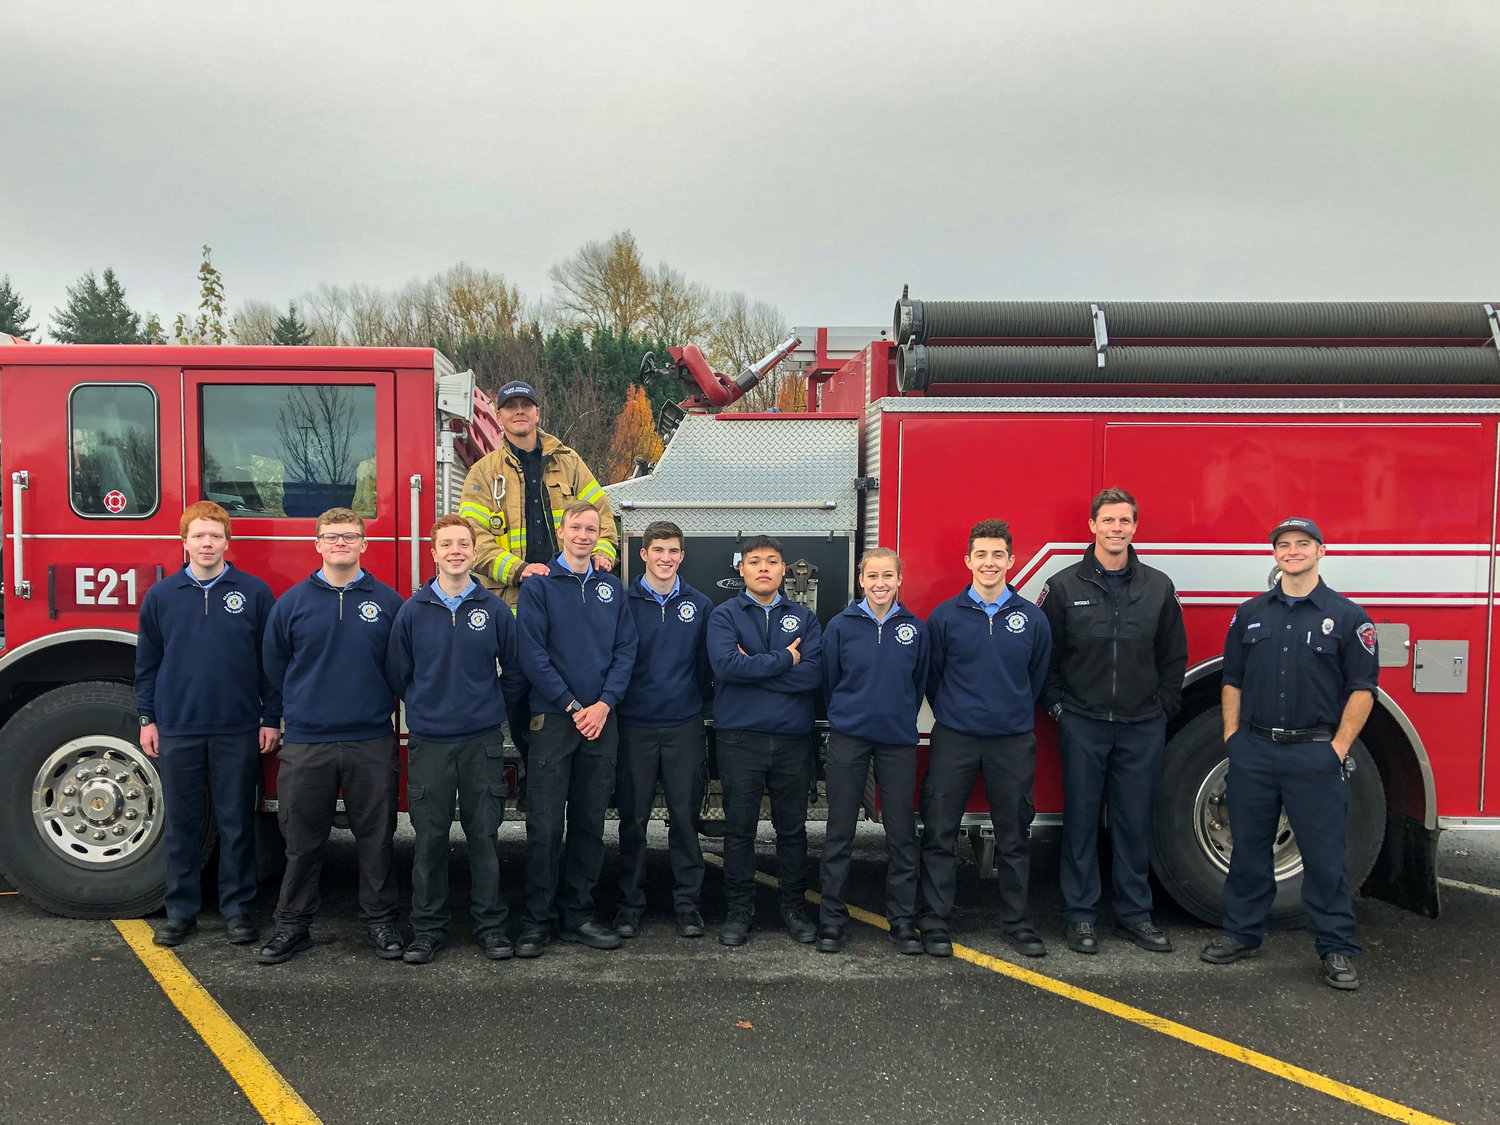 The Woodland Public Schools’ Family Community Resource Center partnered with Clark County Fire and Rescue for the 2019 coat drive.